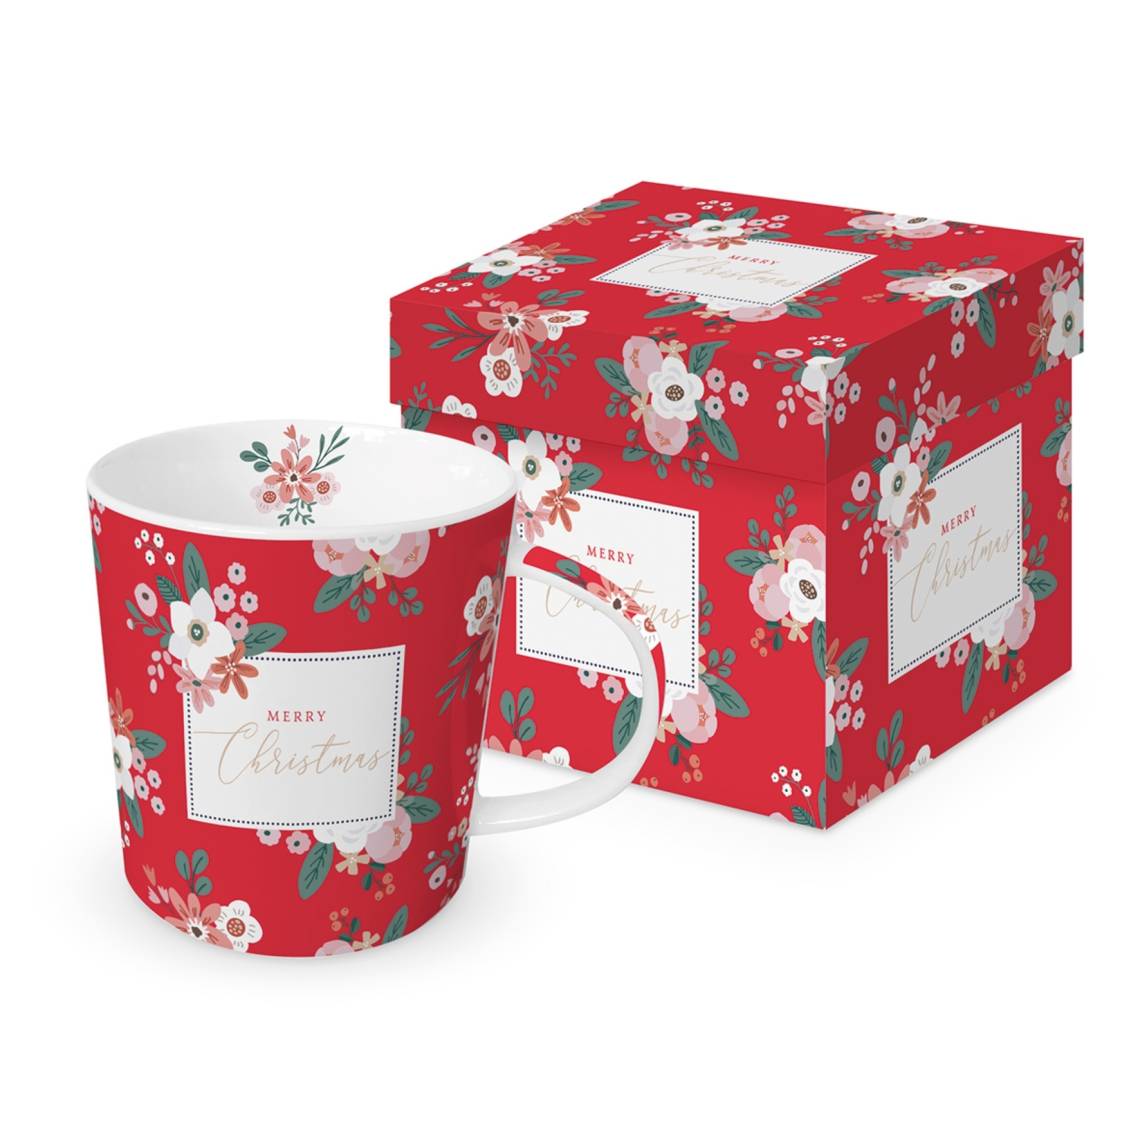 PPD Merry Christmas Trend Mug in Giftbox 360302058